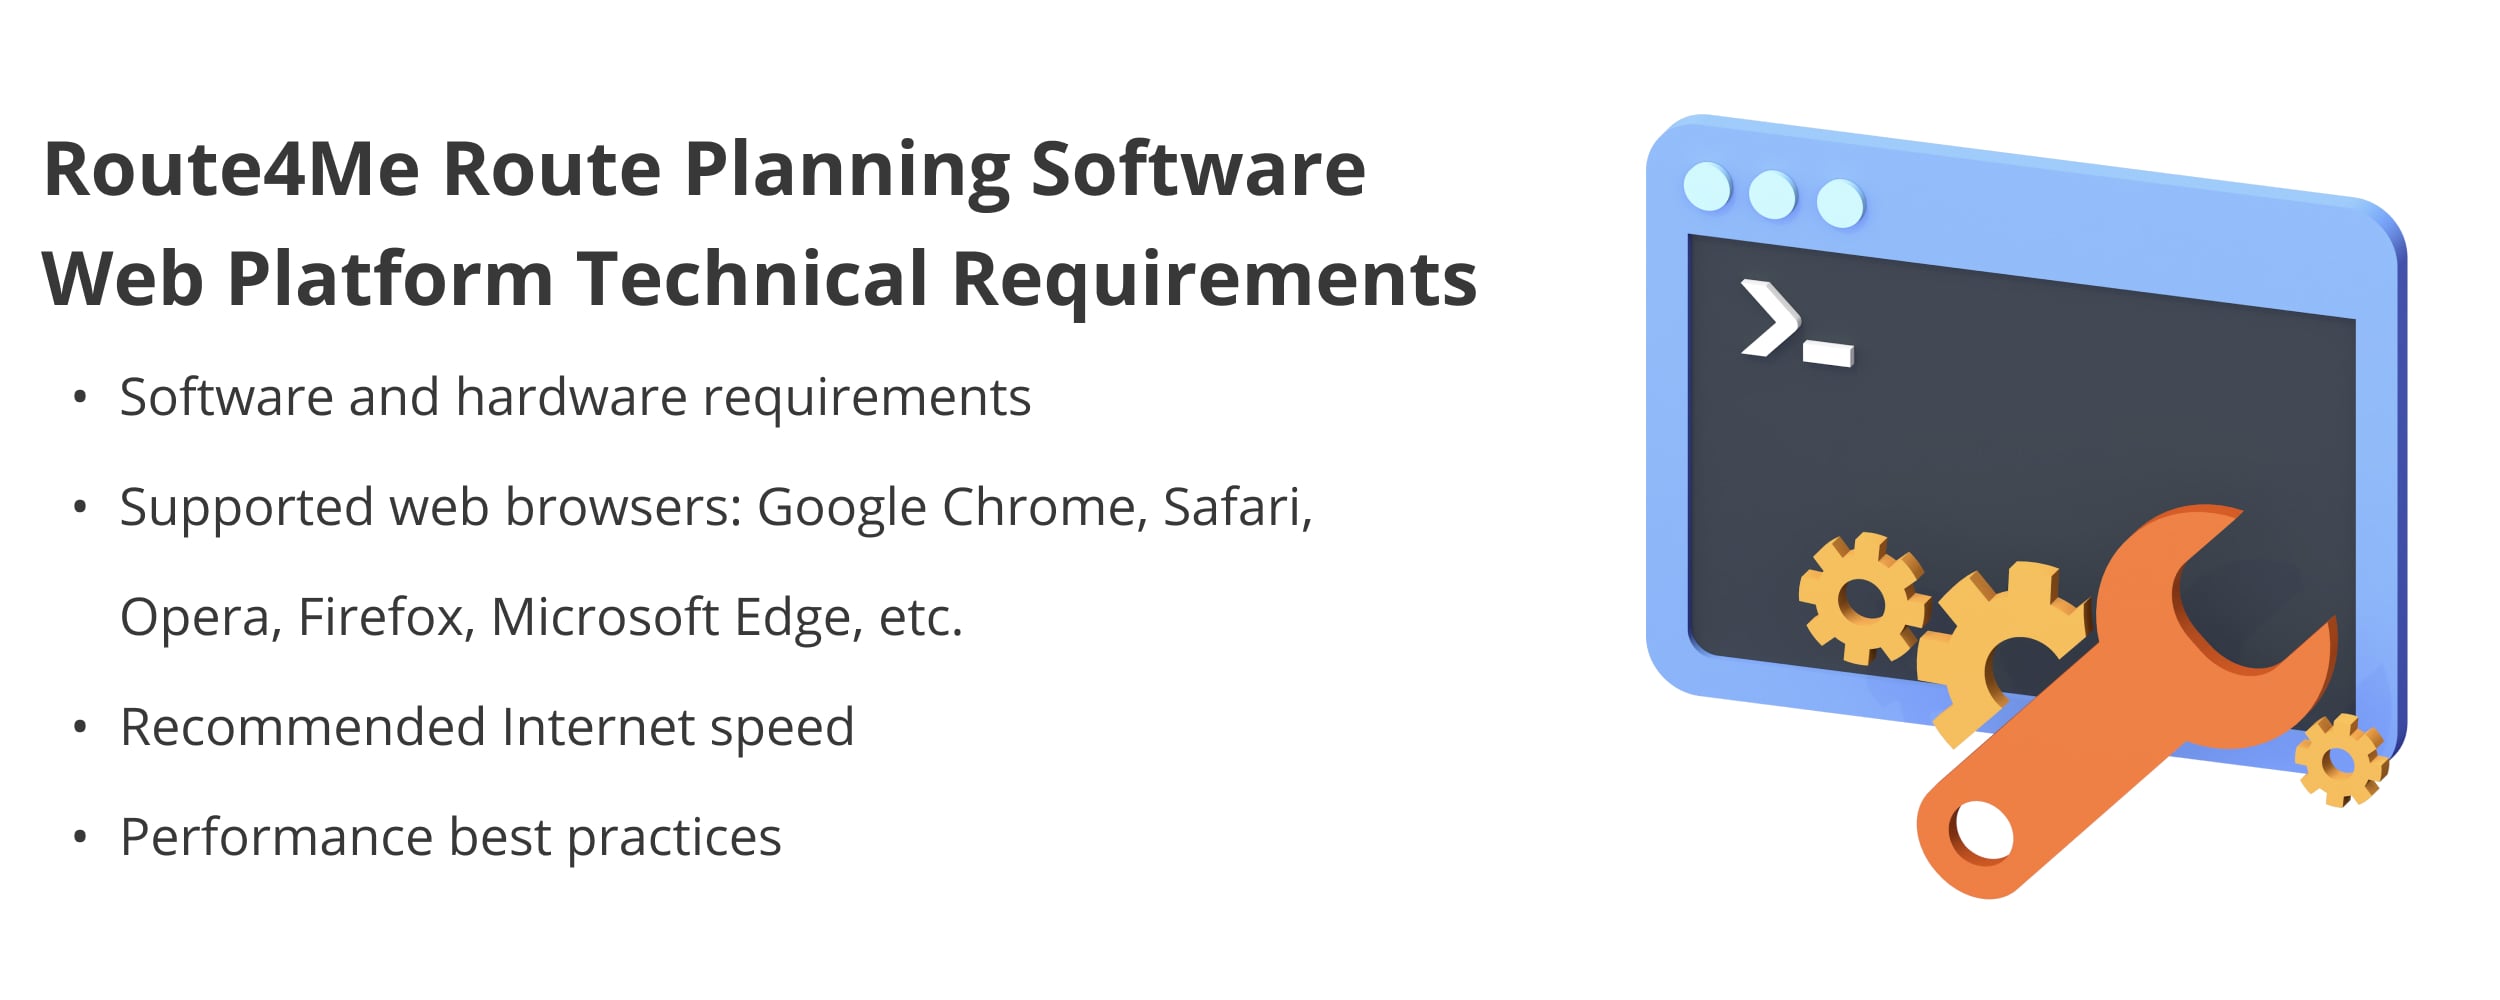 Route planner technical requirements for software, hardware, supported web browsers, and more.